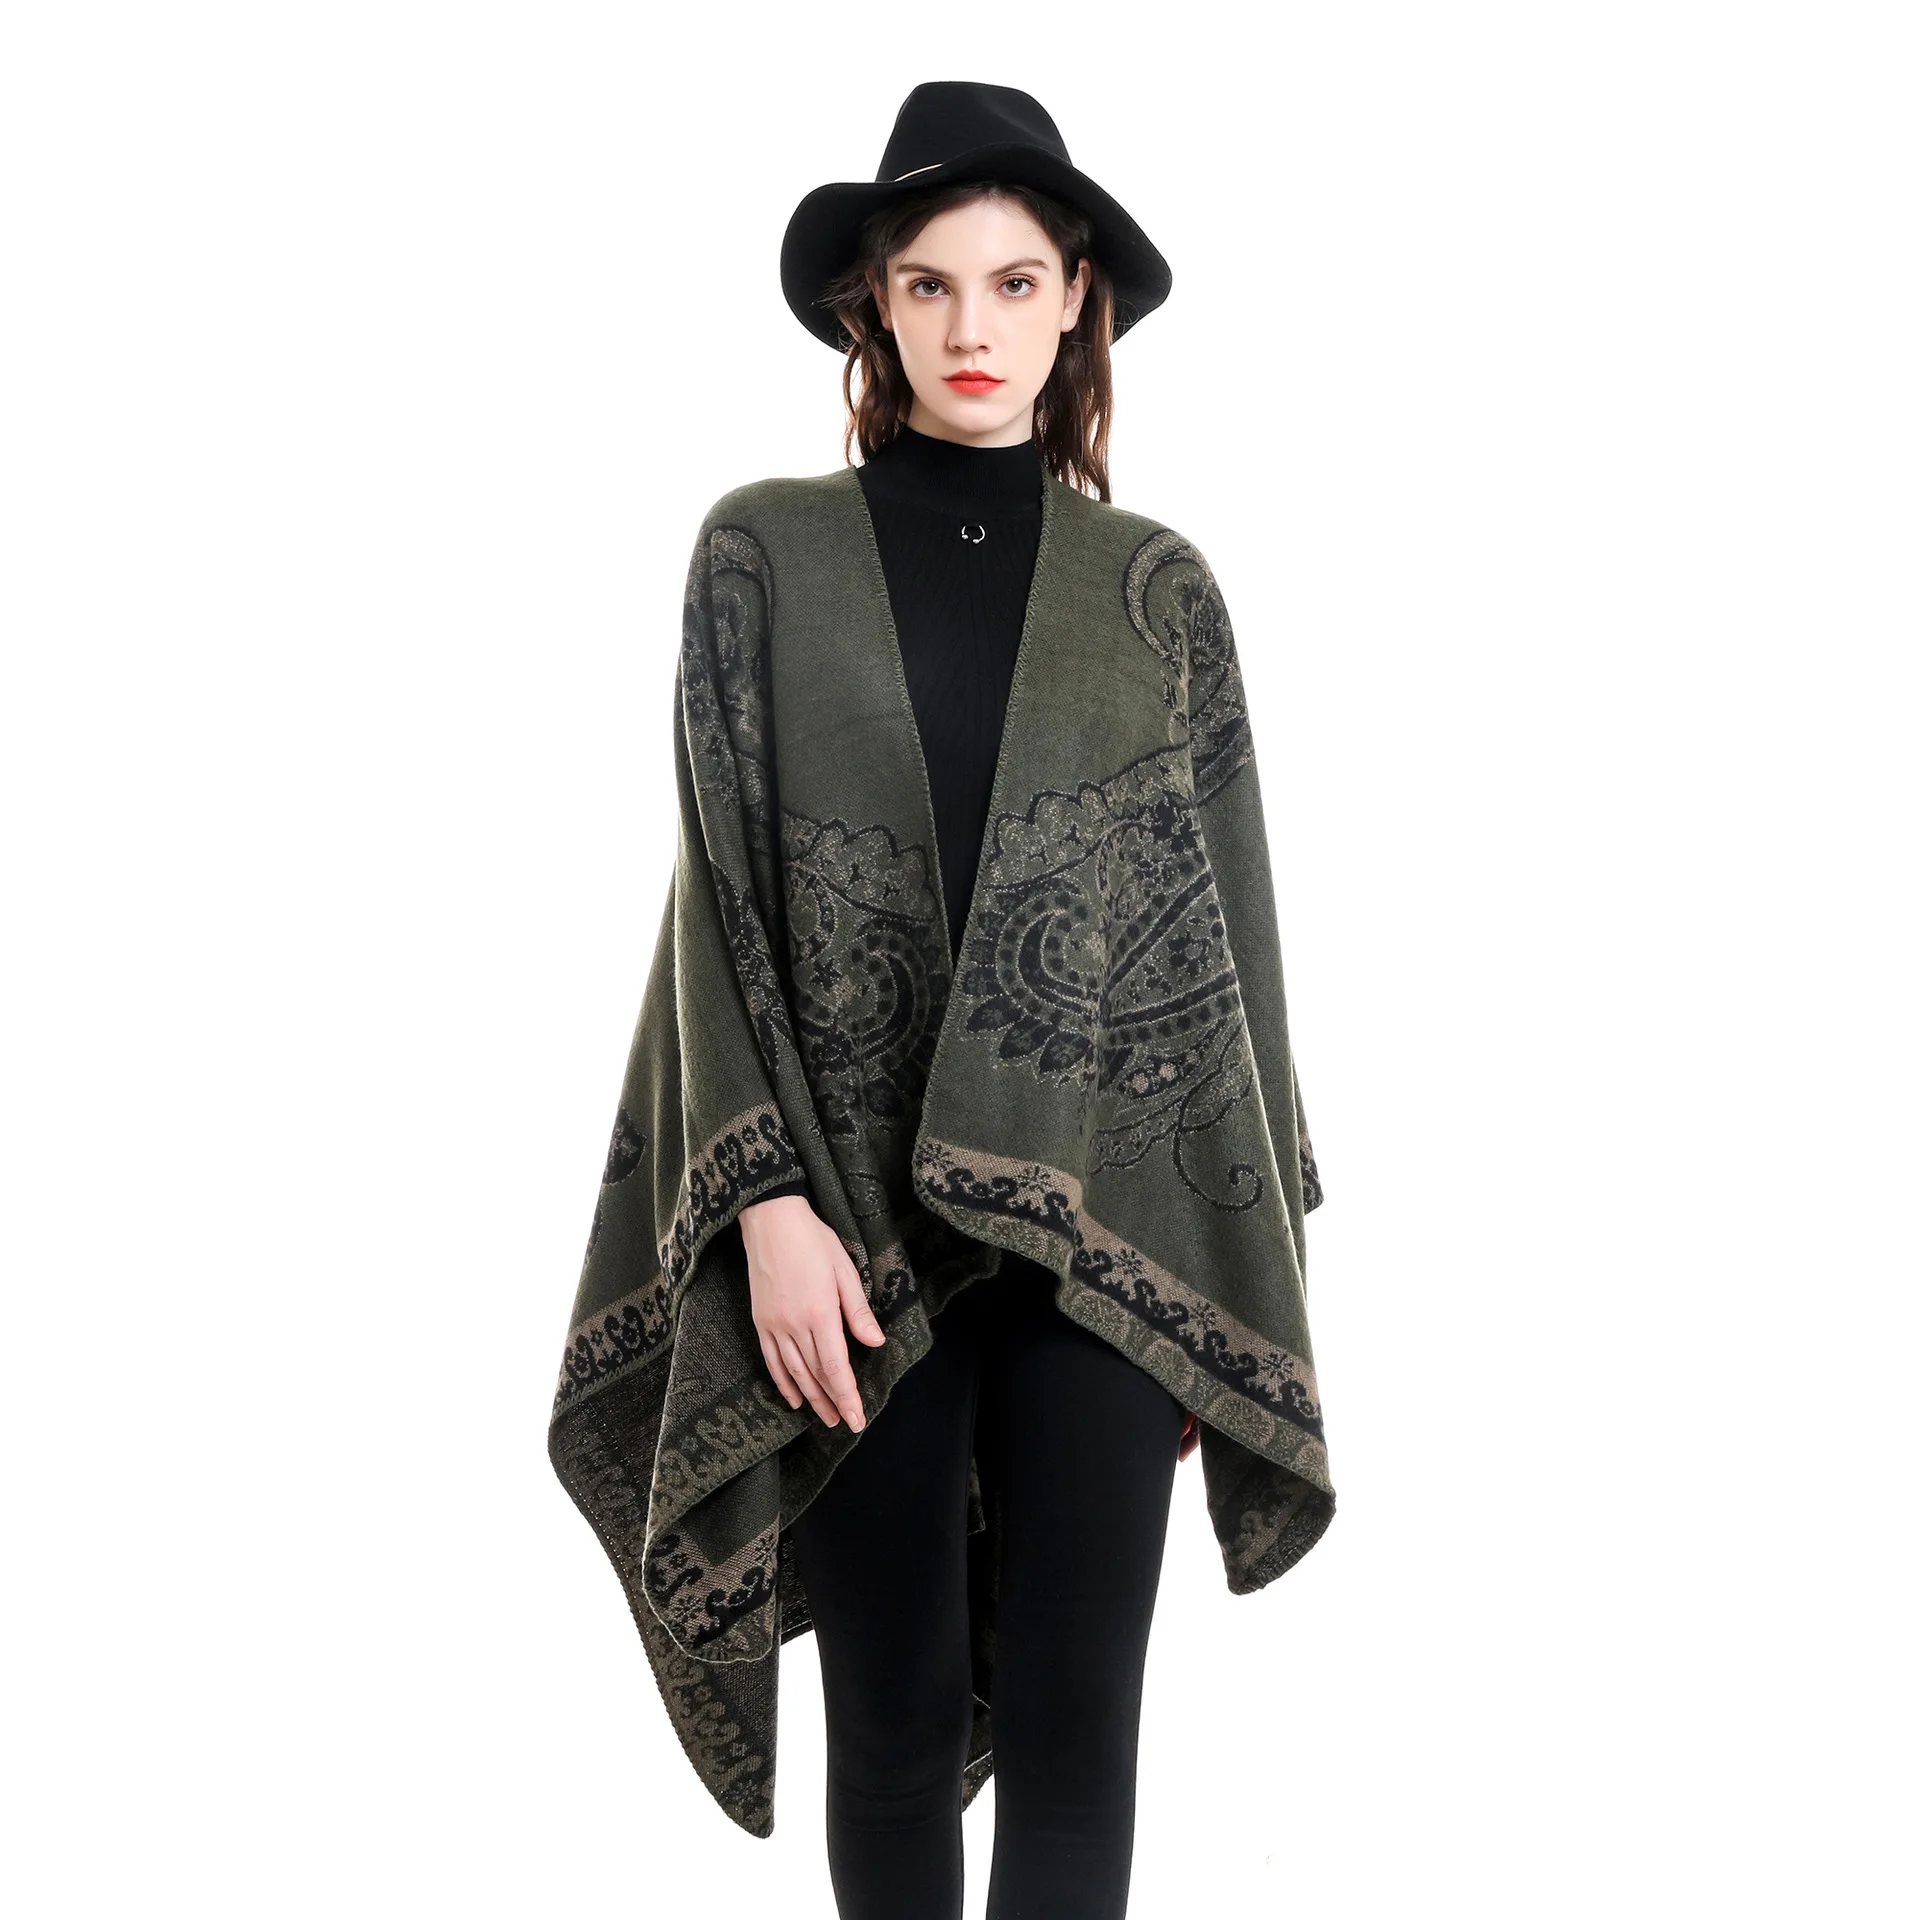 Women Cashmere Feel Ethnic Shawl Lady Double-sided Winter Cape Spring Autumn Retro Unique Cardigan Soft Large Blanket Wholesale women spring autumn shawl lady knitted tassels cardigan loose fall winter wrap solid color woolen yarn scarf wholesale fpwp19